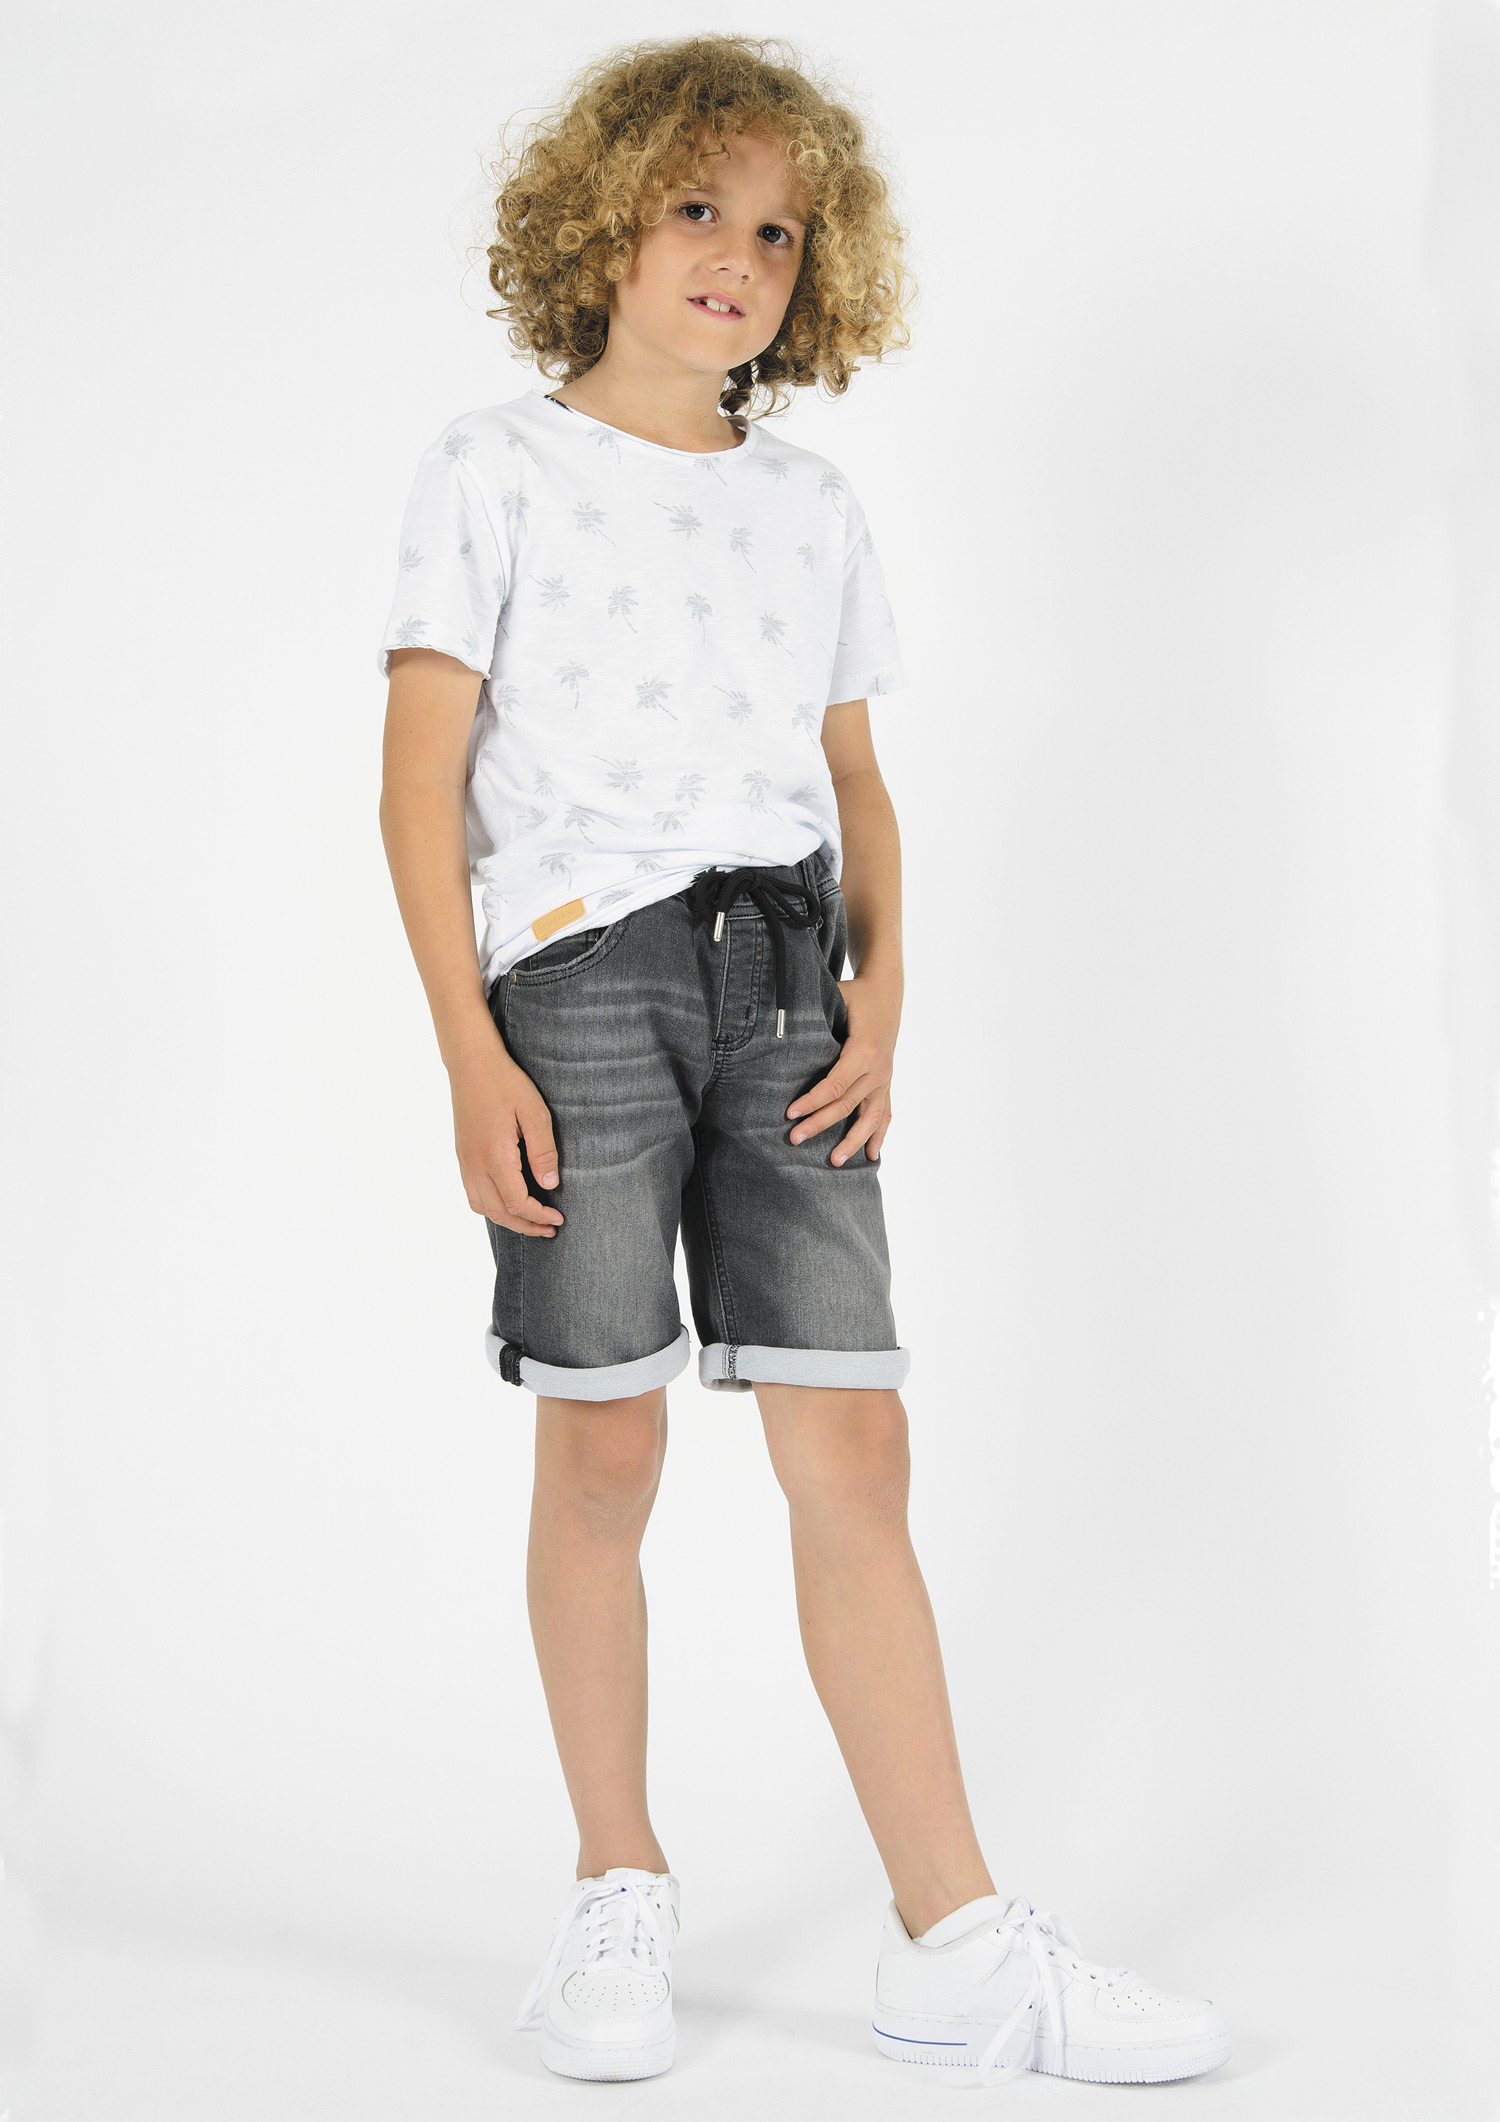 4831-Boys Jogg Short Sweat Denim, available in Normal